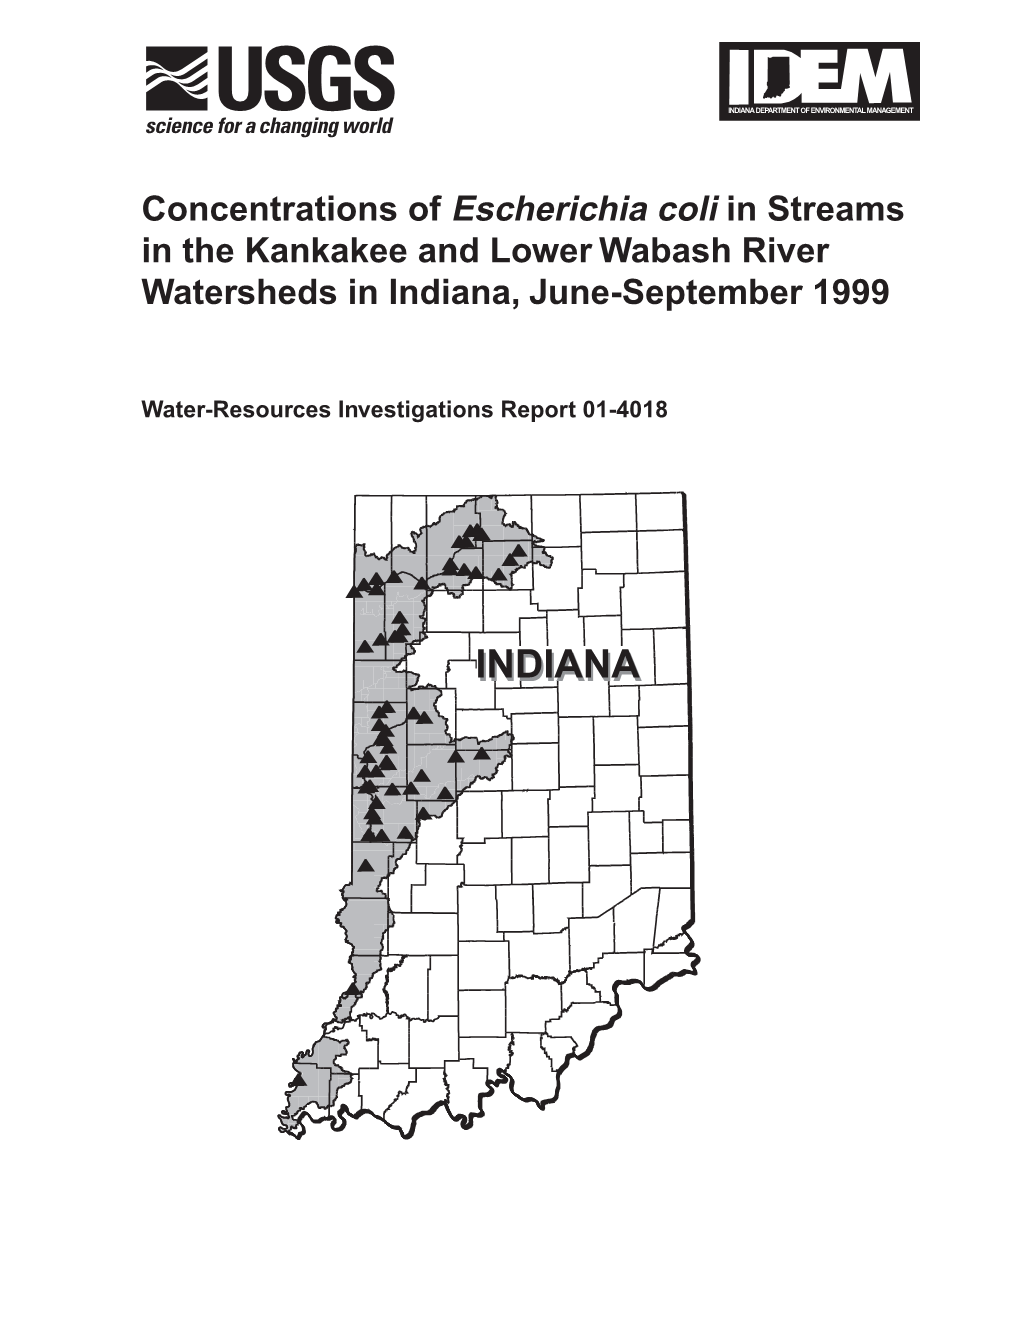 Concentrations of Escherichia Coli in Streams in the Kankakee and Lower Wabash River Watersheds in Indiana, June-September 1999